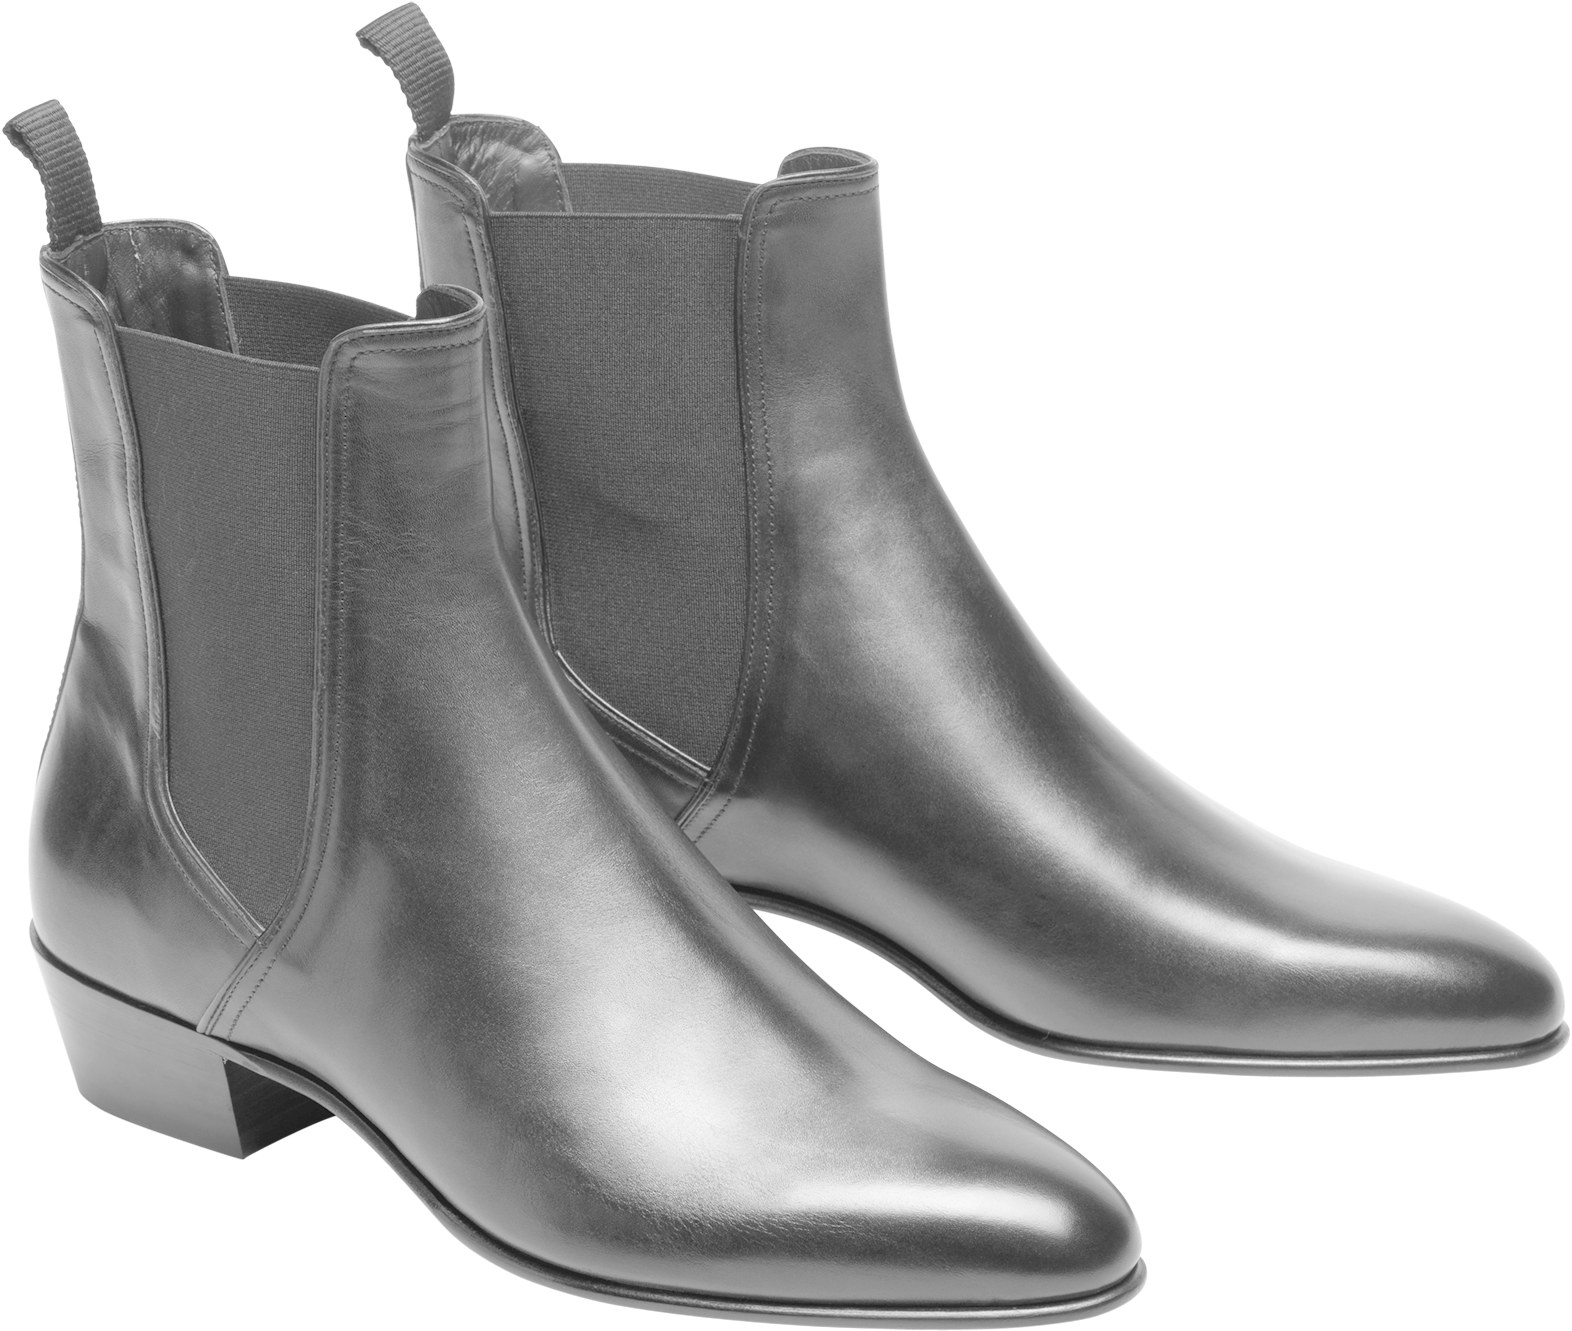 Calf Leather Chelsea Boots - Black Leather Chelsea Boots Png (2048x1509)